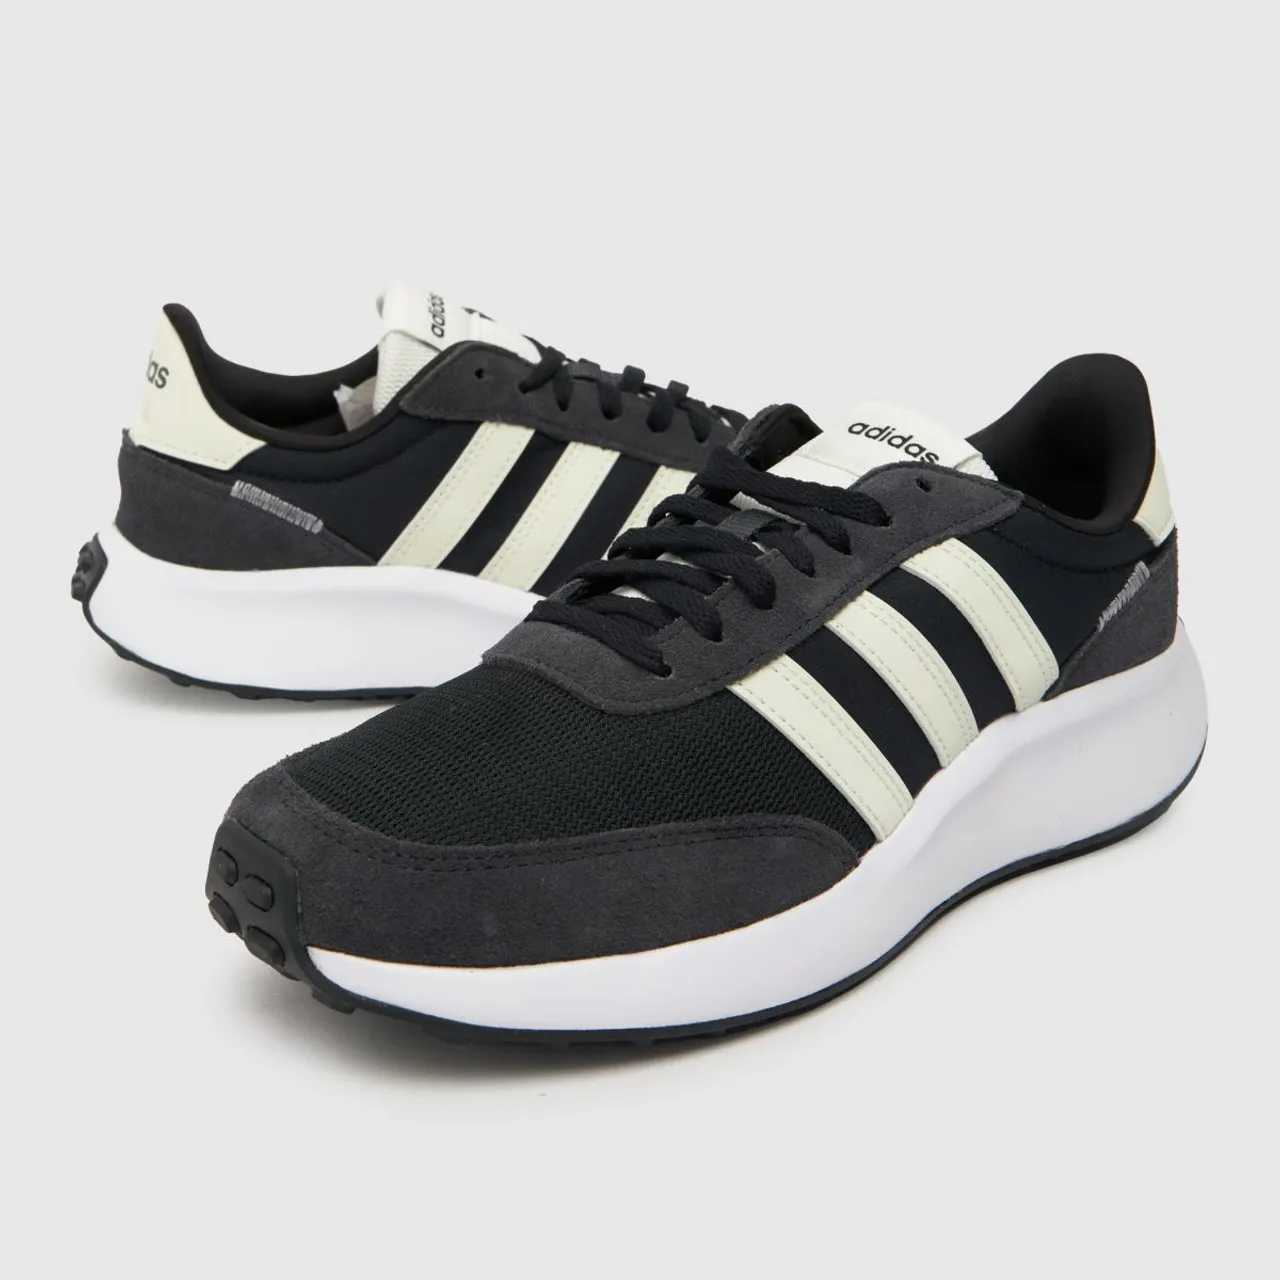 Adidas Run 70s Trainers In Black & White